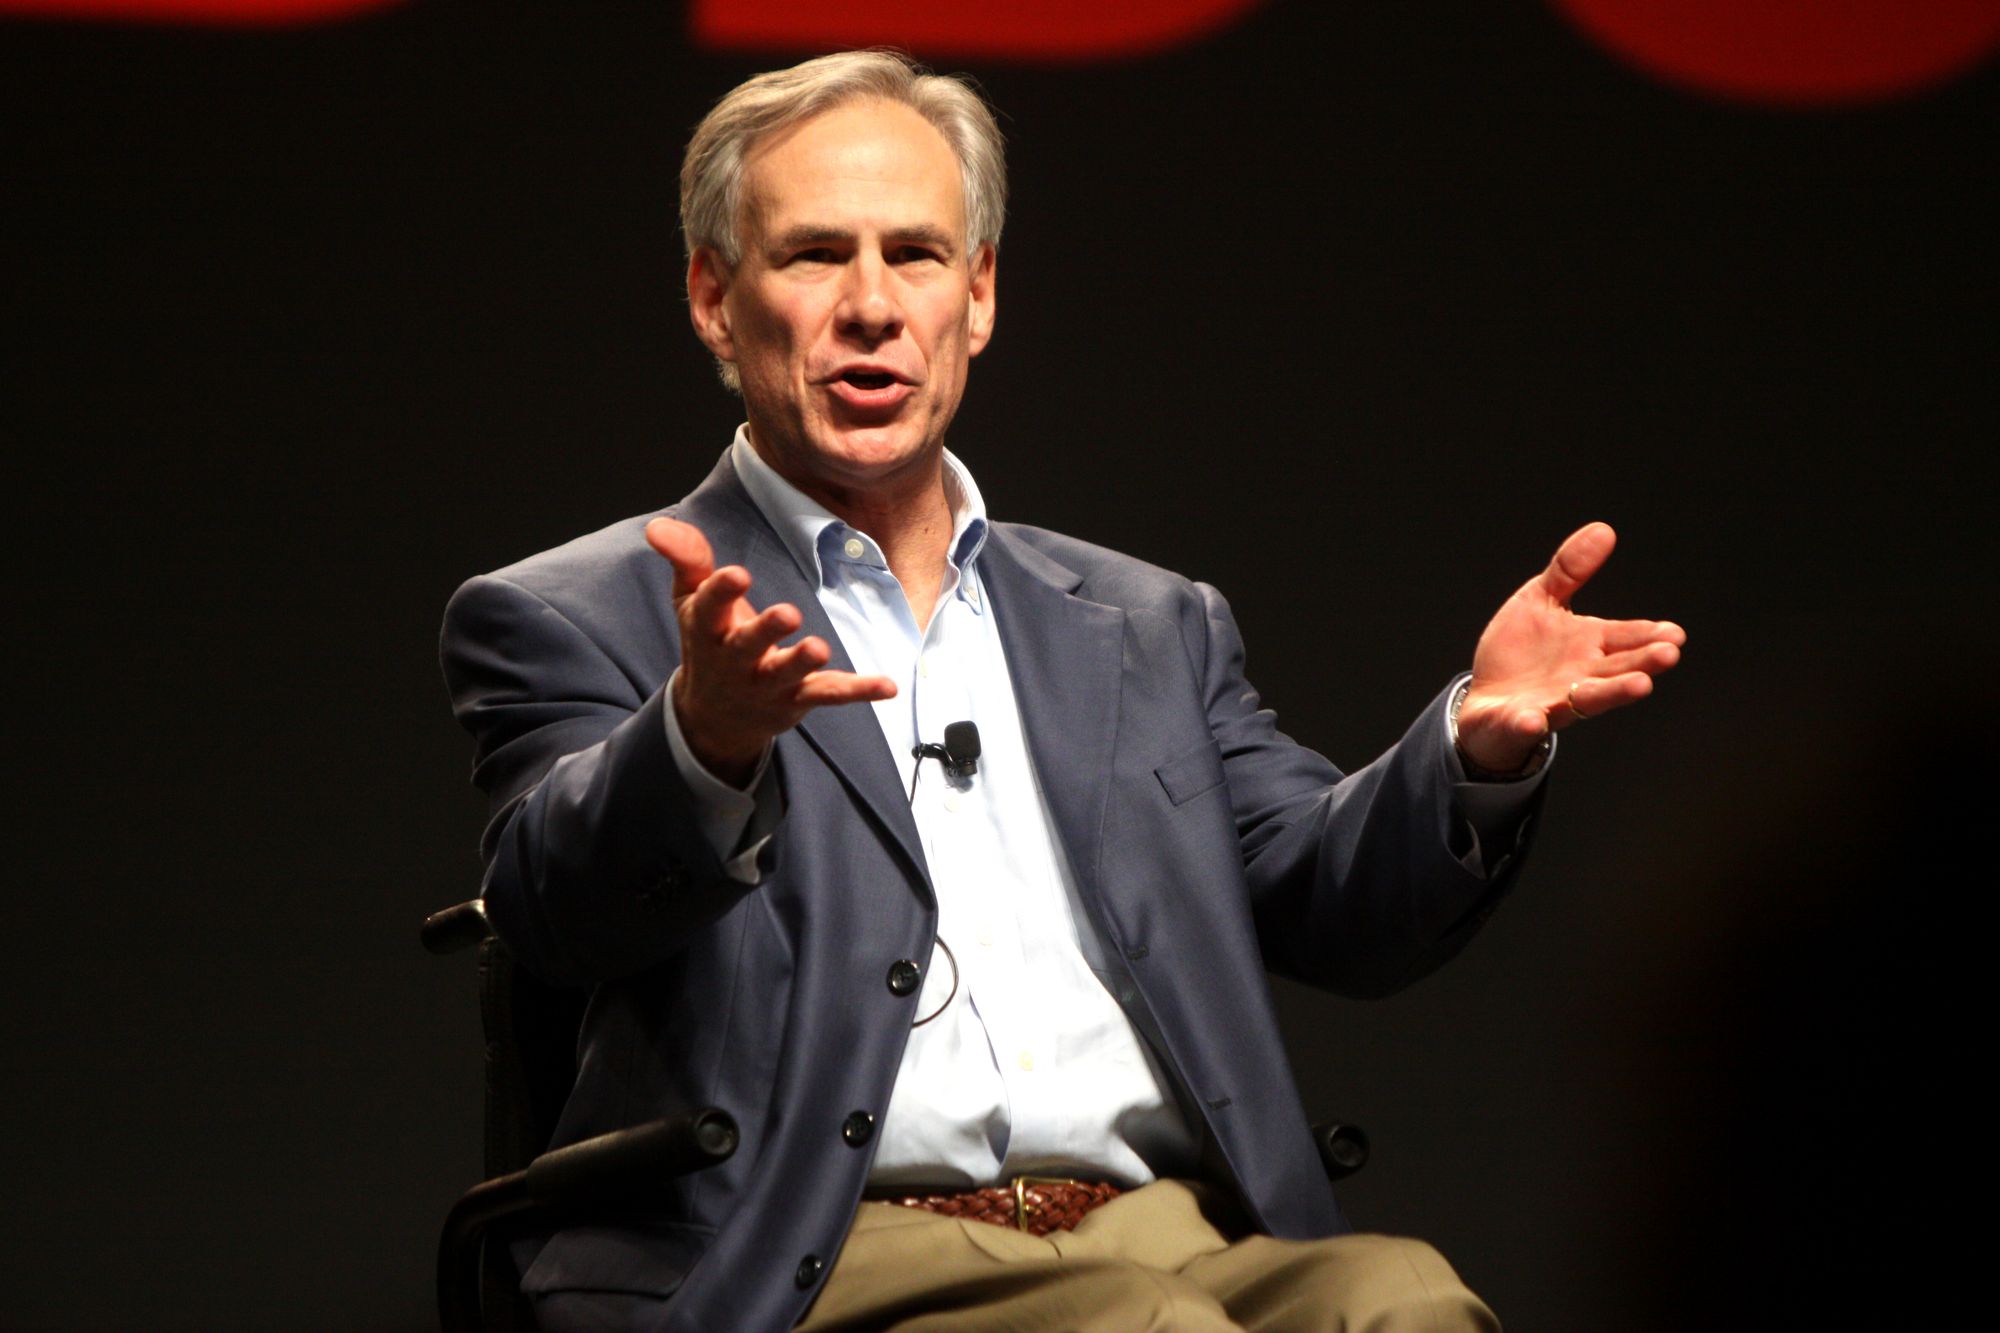 Texas Gov. Greg Abbott won his primary race despite a challenge from the right. Photo: Gage Skidmore